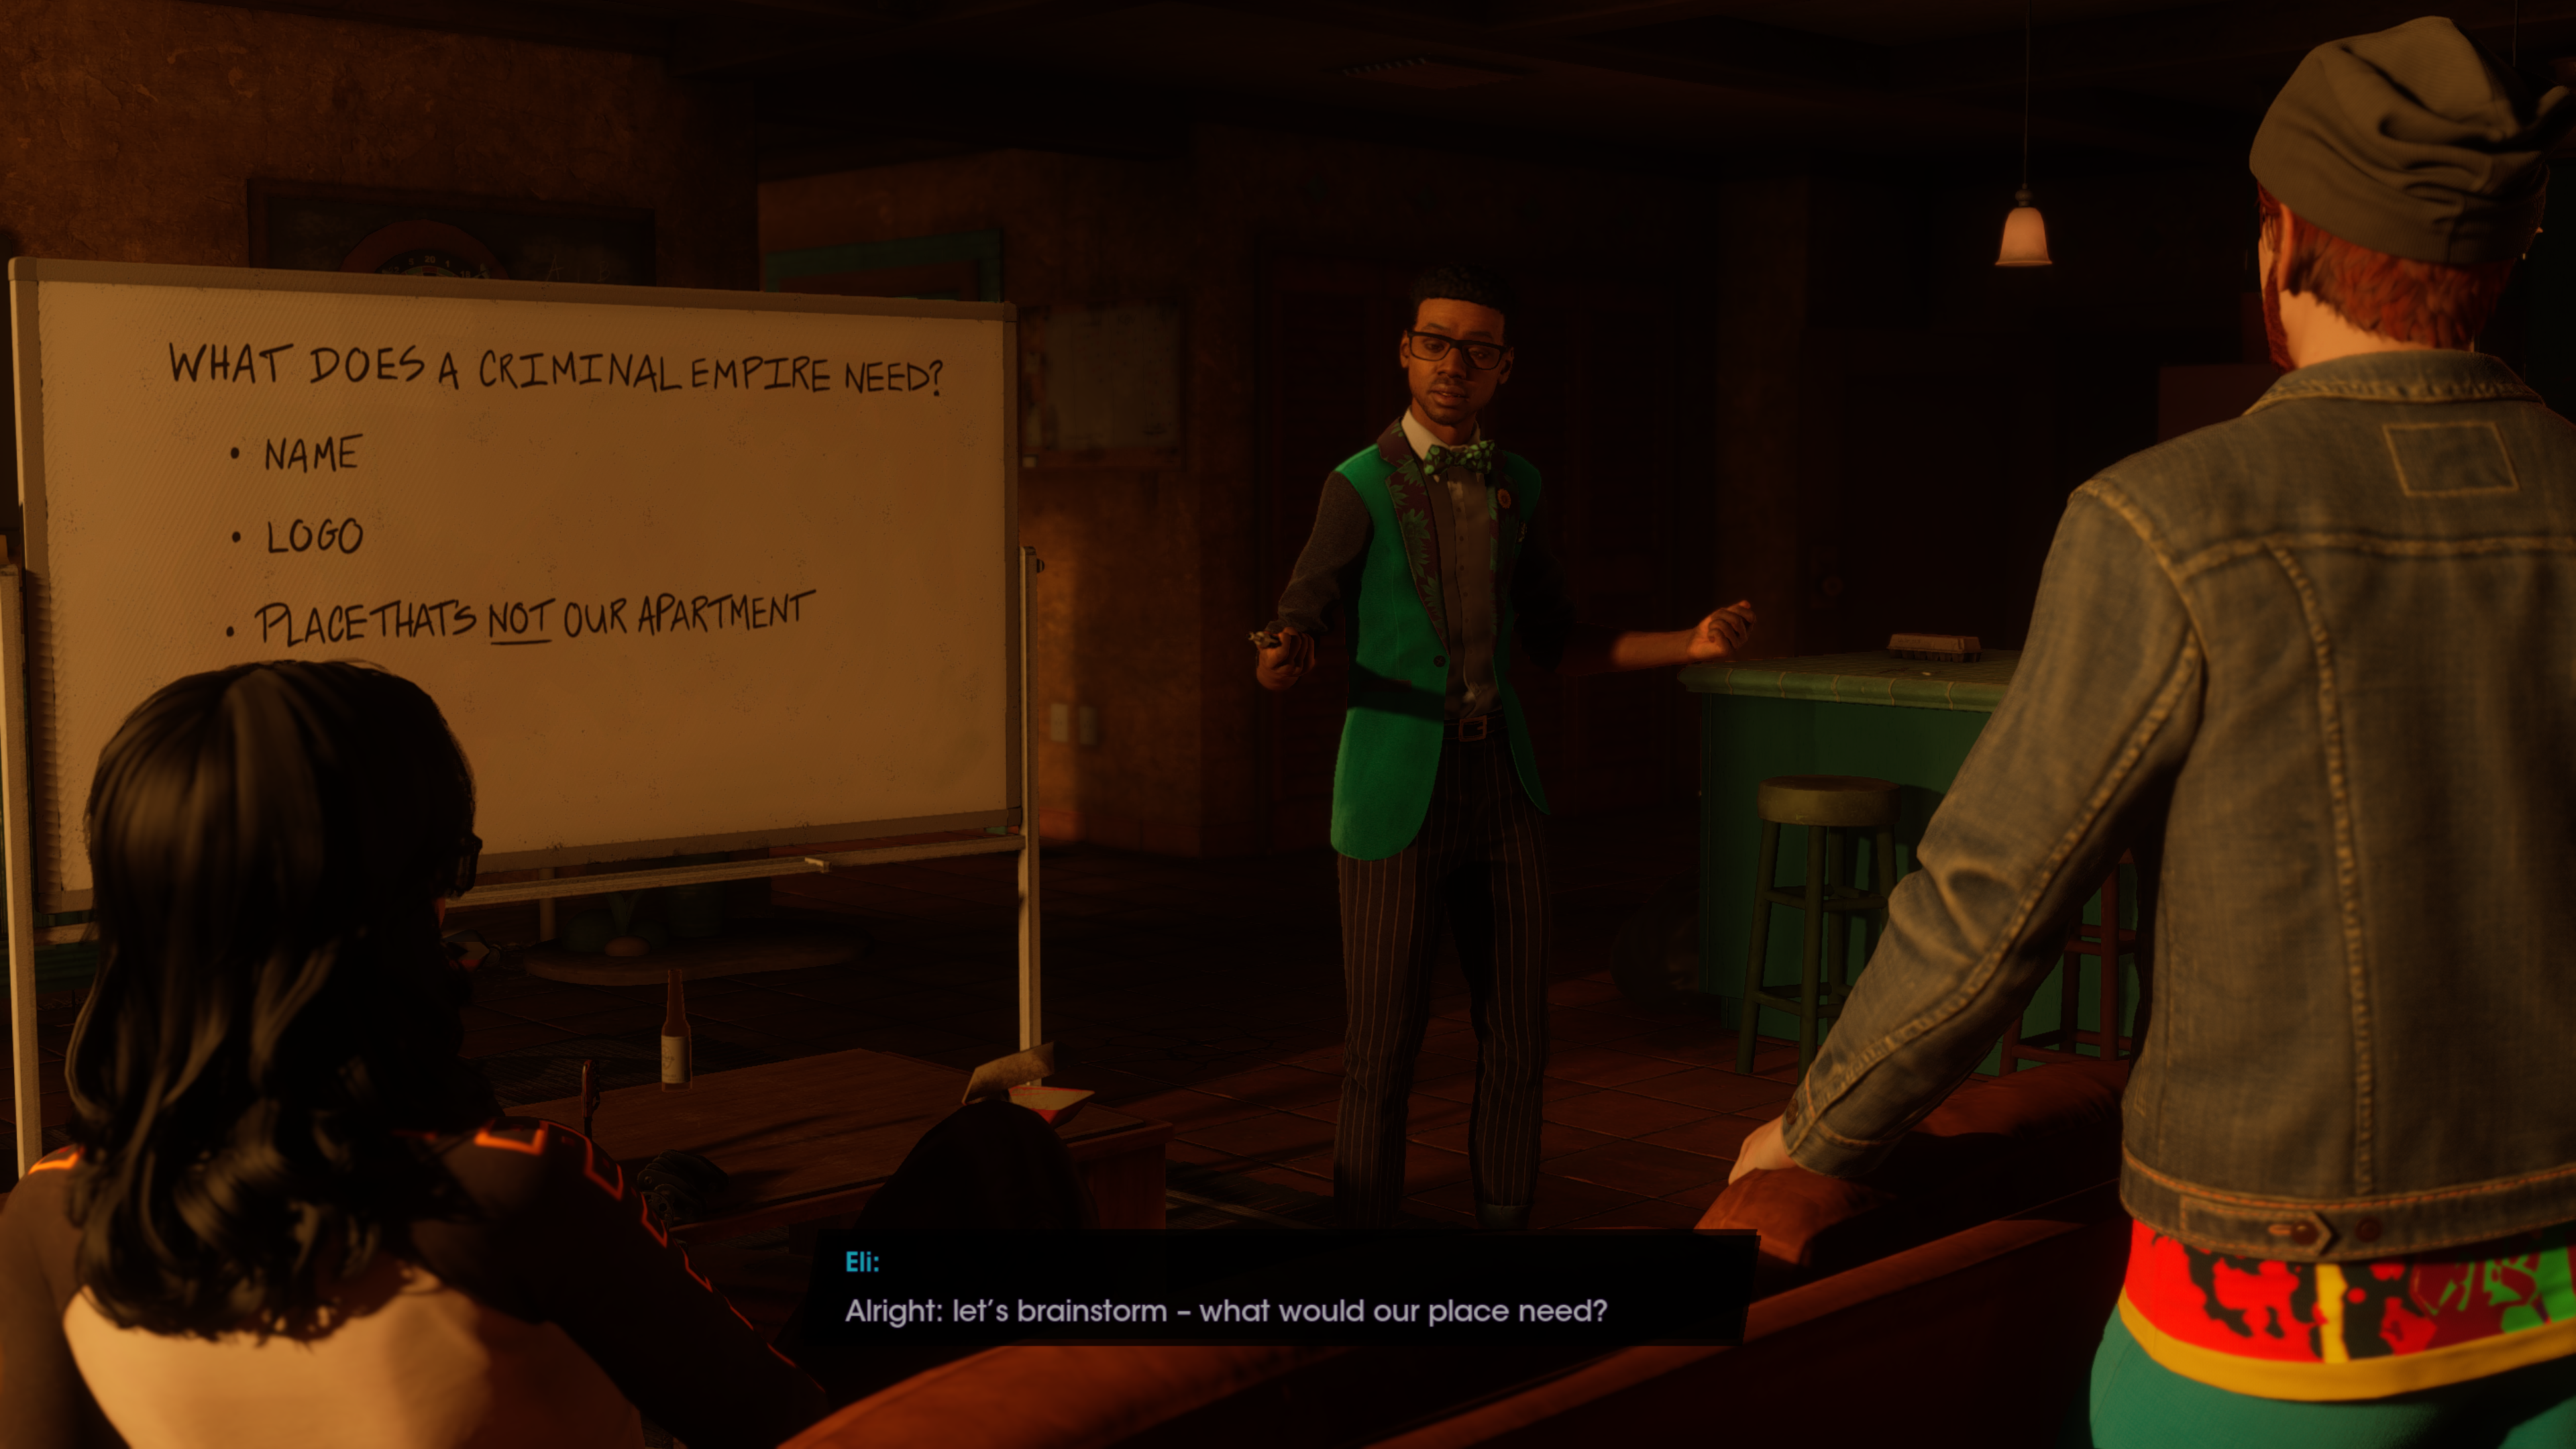 Saints Row' Review: Open-World Sandbox That's All About The Grind